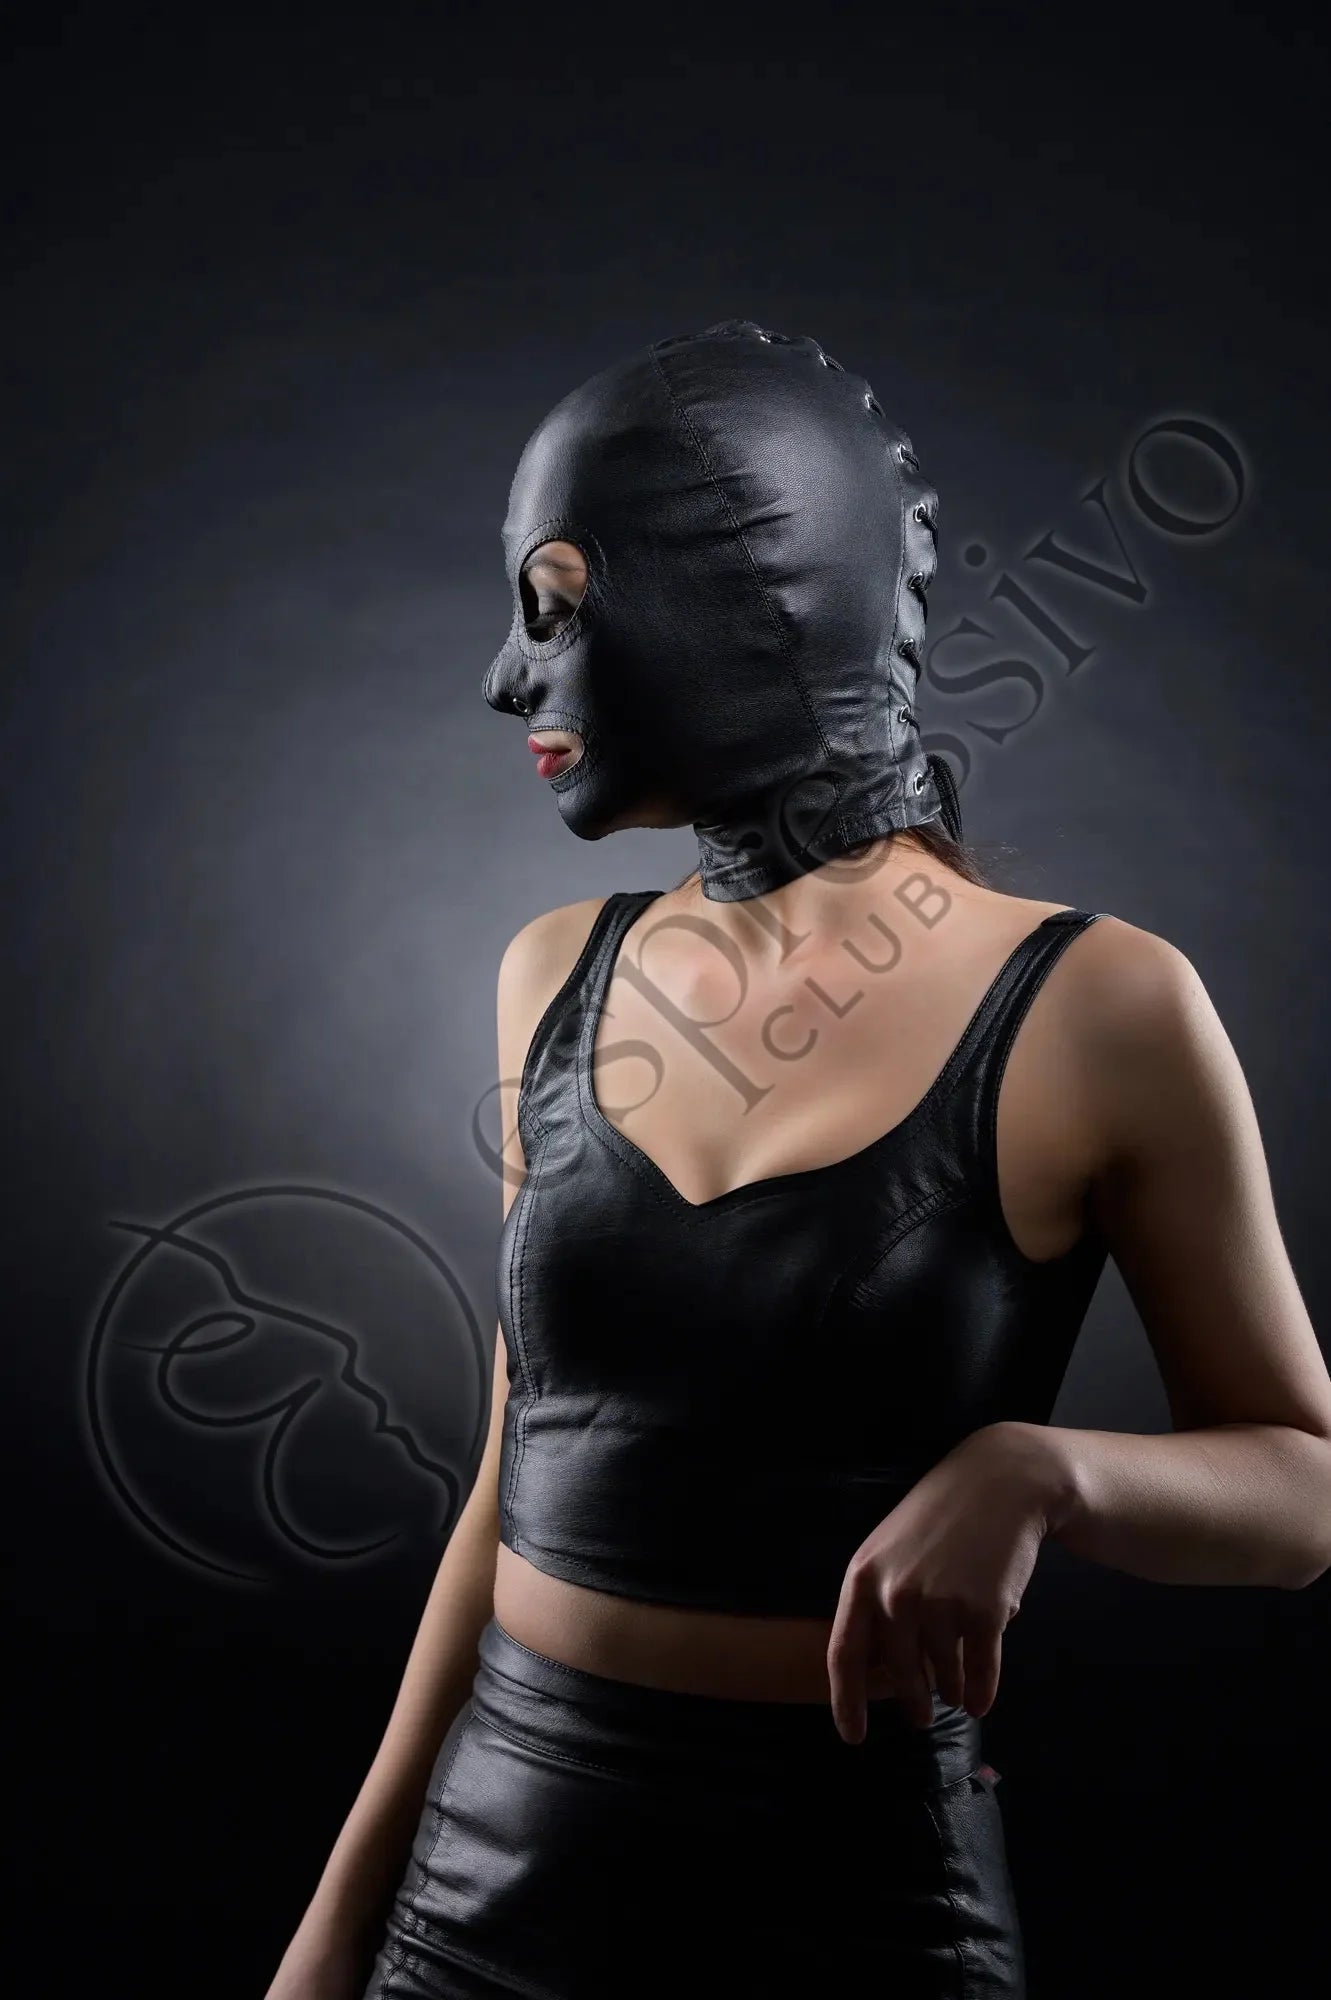 Tight Leather BDSM Hood Open Mouth and Eyes - Female Model